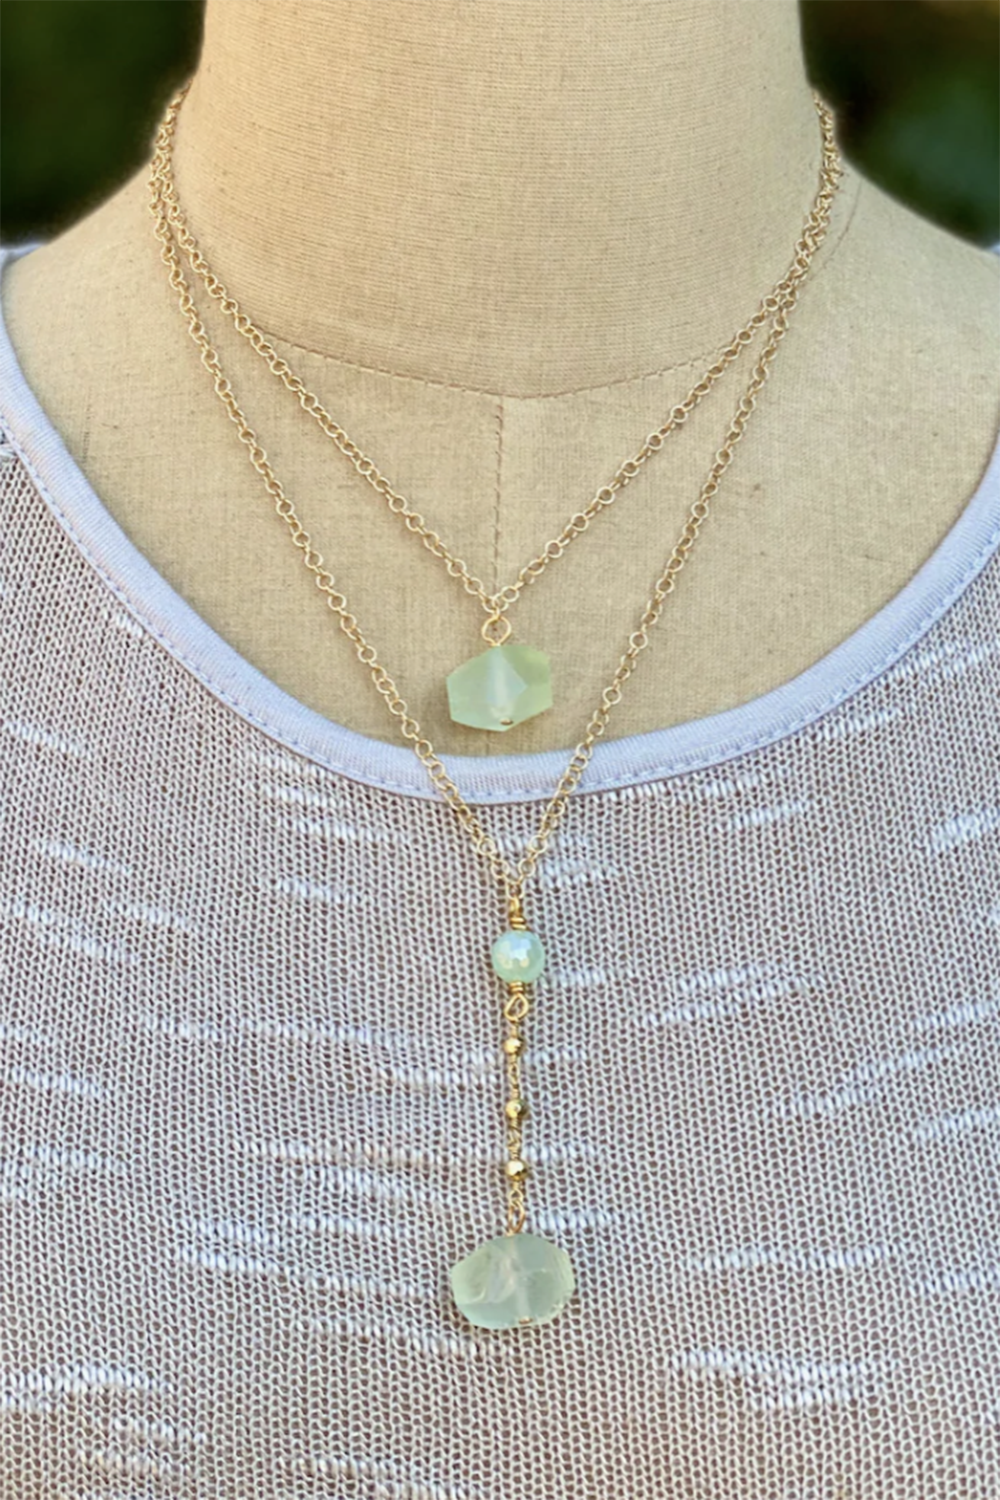 ID Tranquil Necklace - Island Time